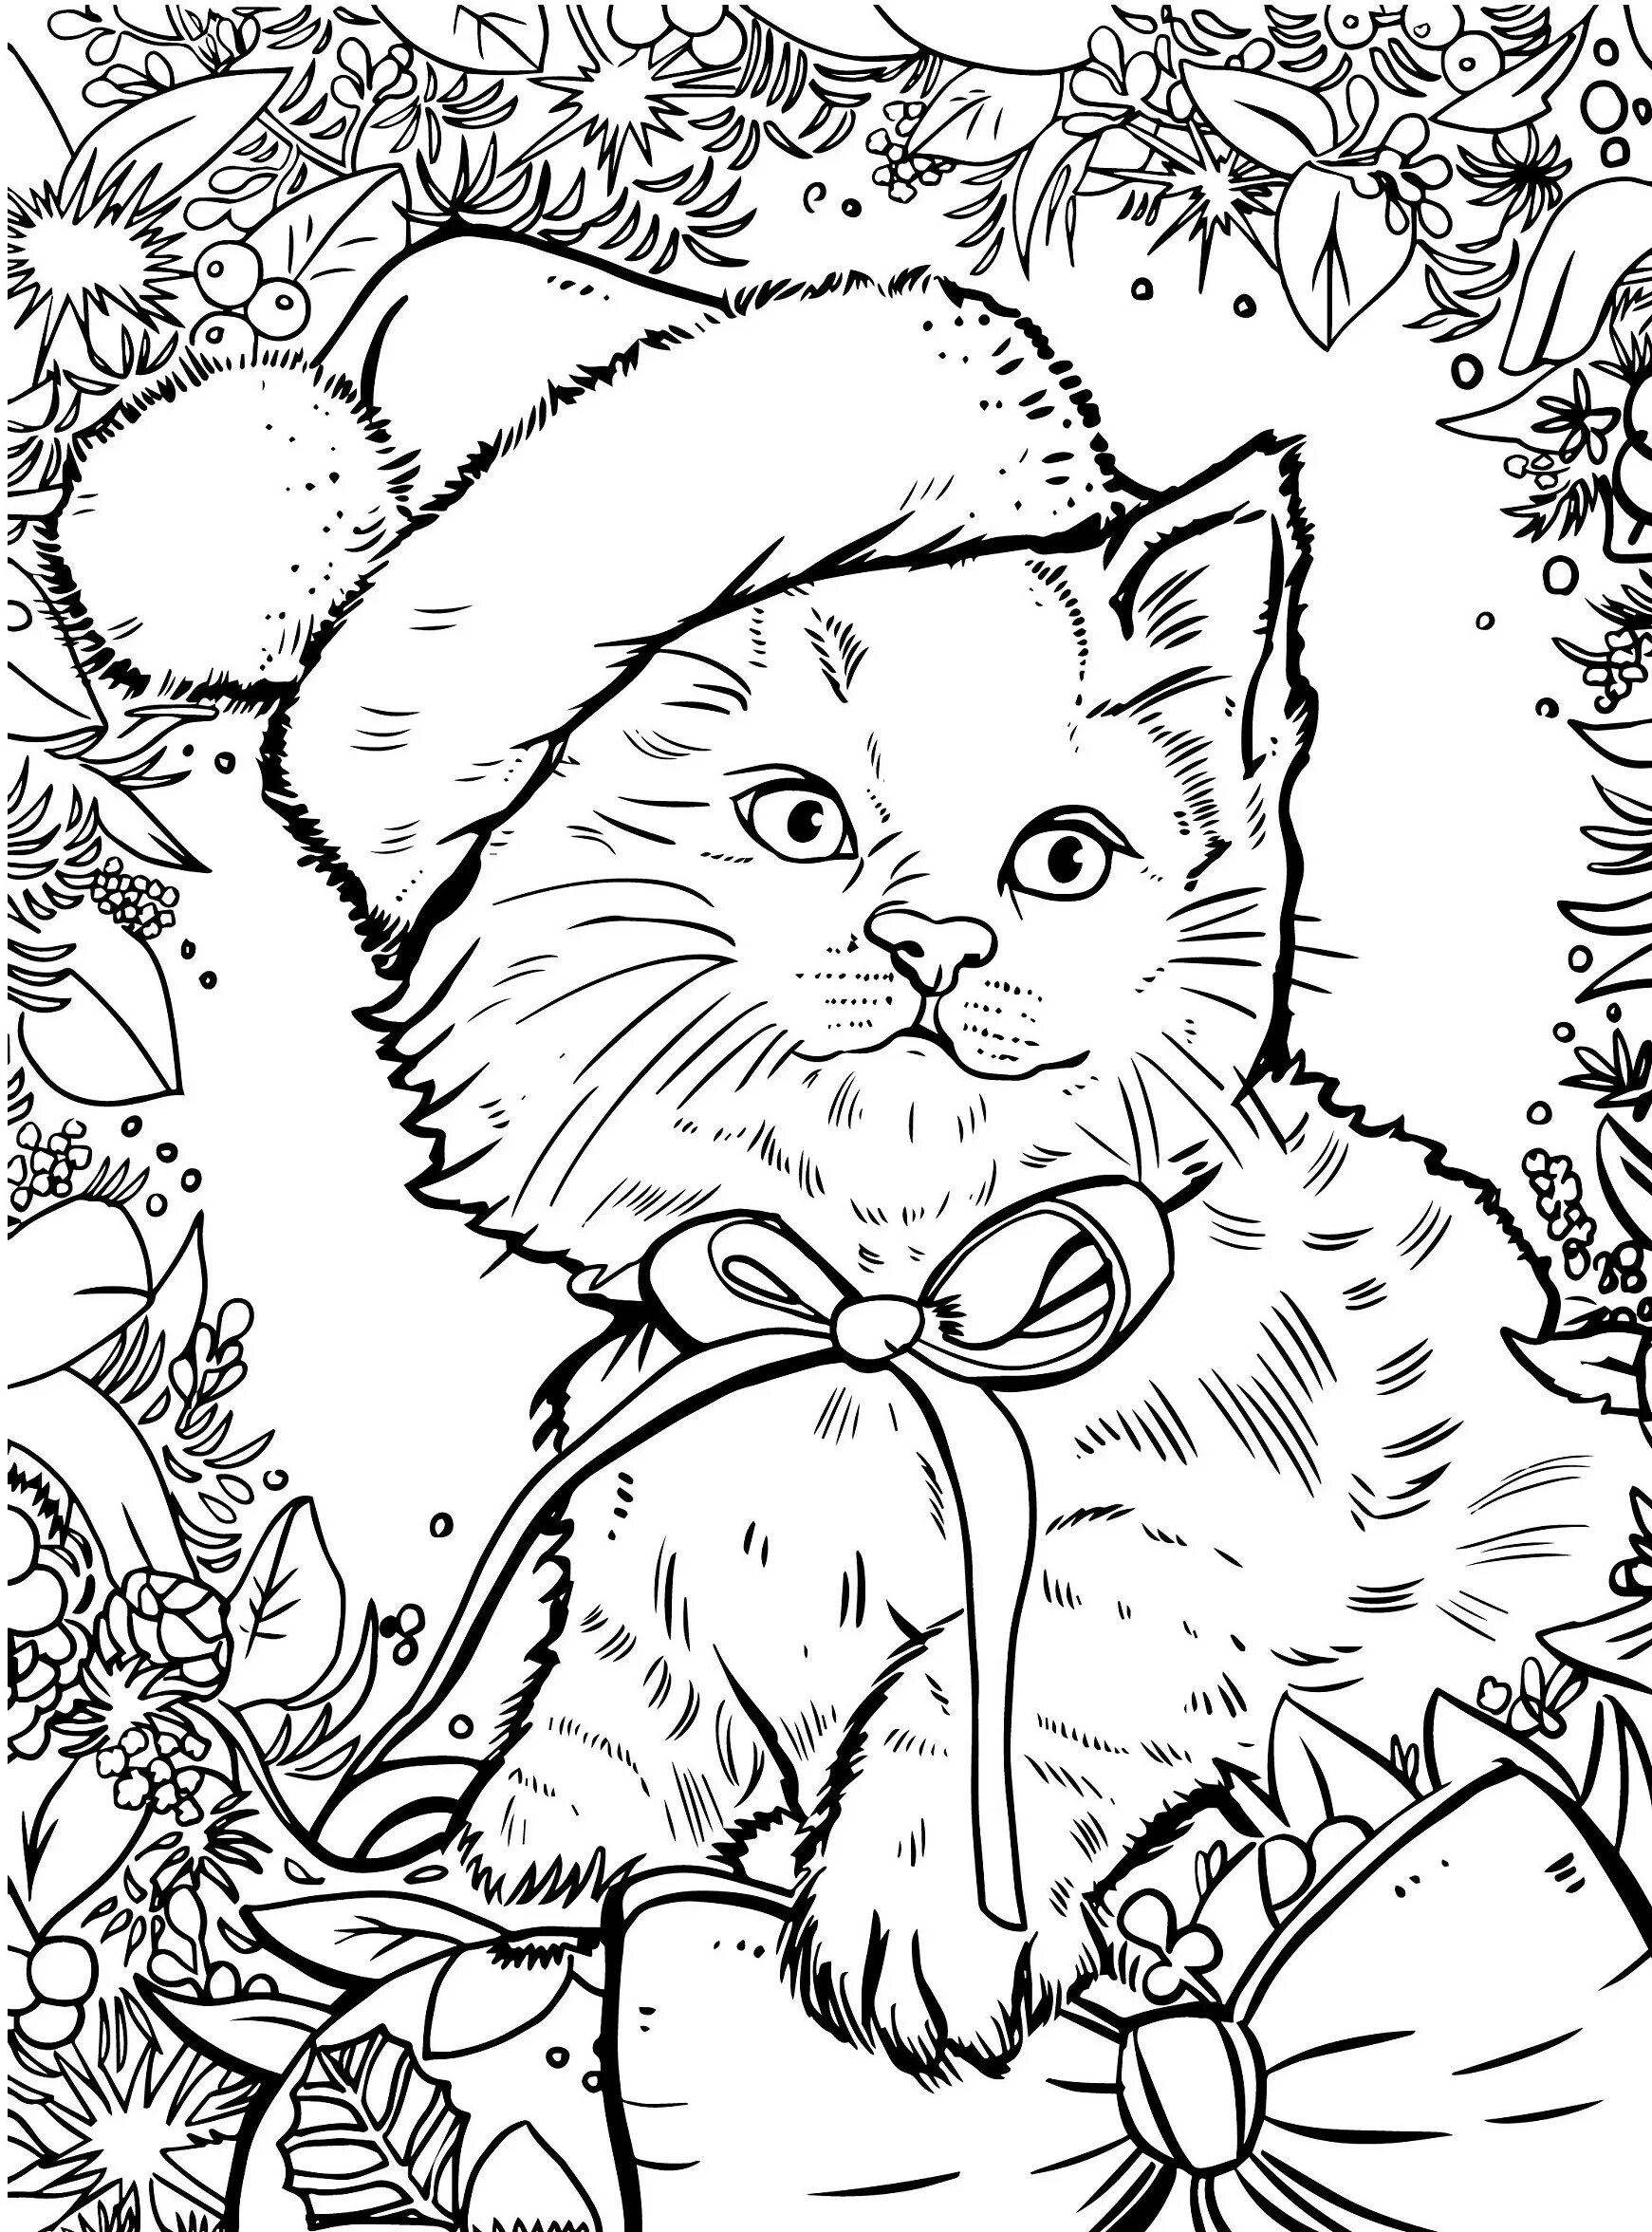 Amazing Christmas cat coloring book